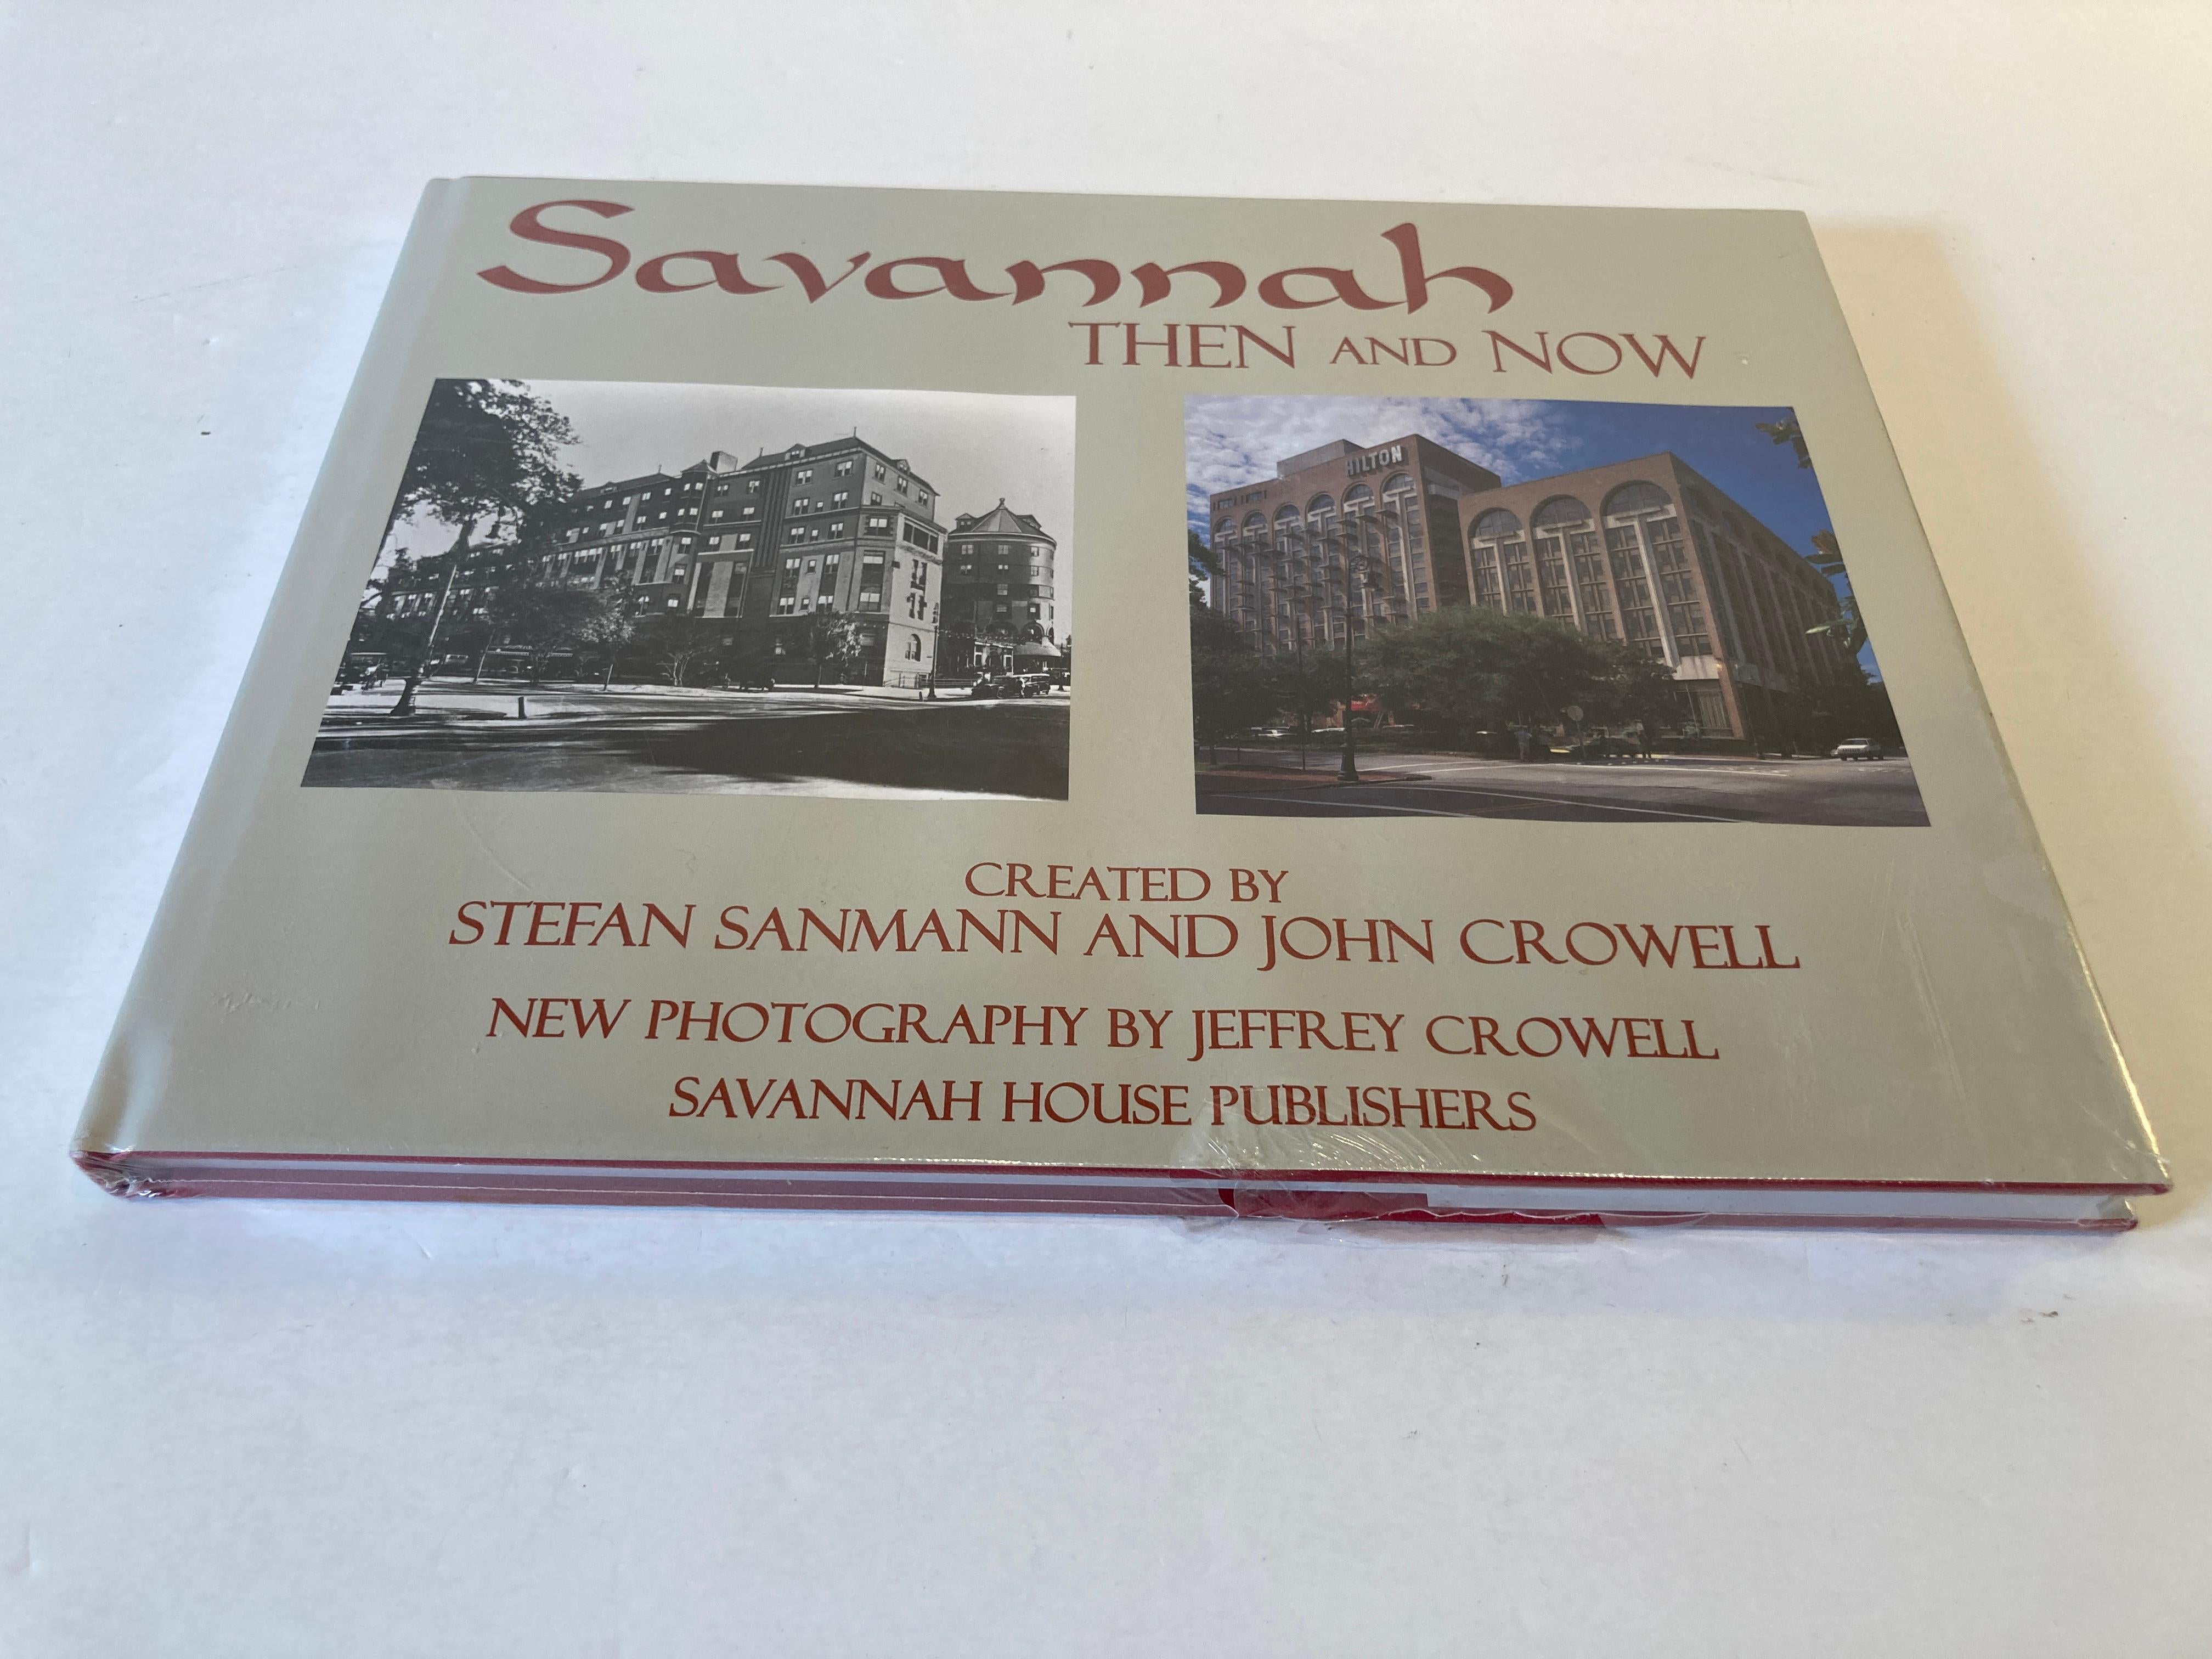 Folk Art Savannah Then and Now by Stefan Sanmann and John Crowell Hardcover Book For Sale